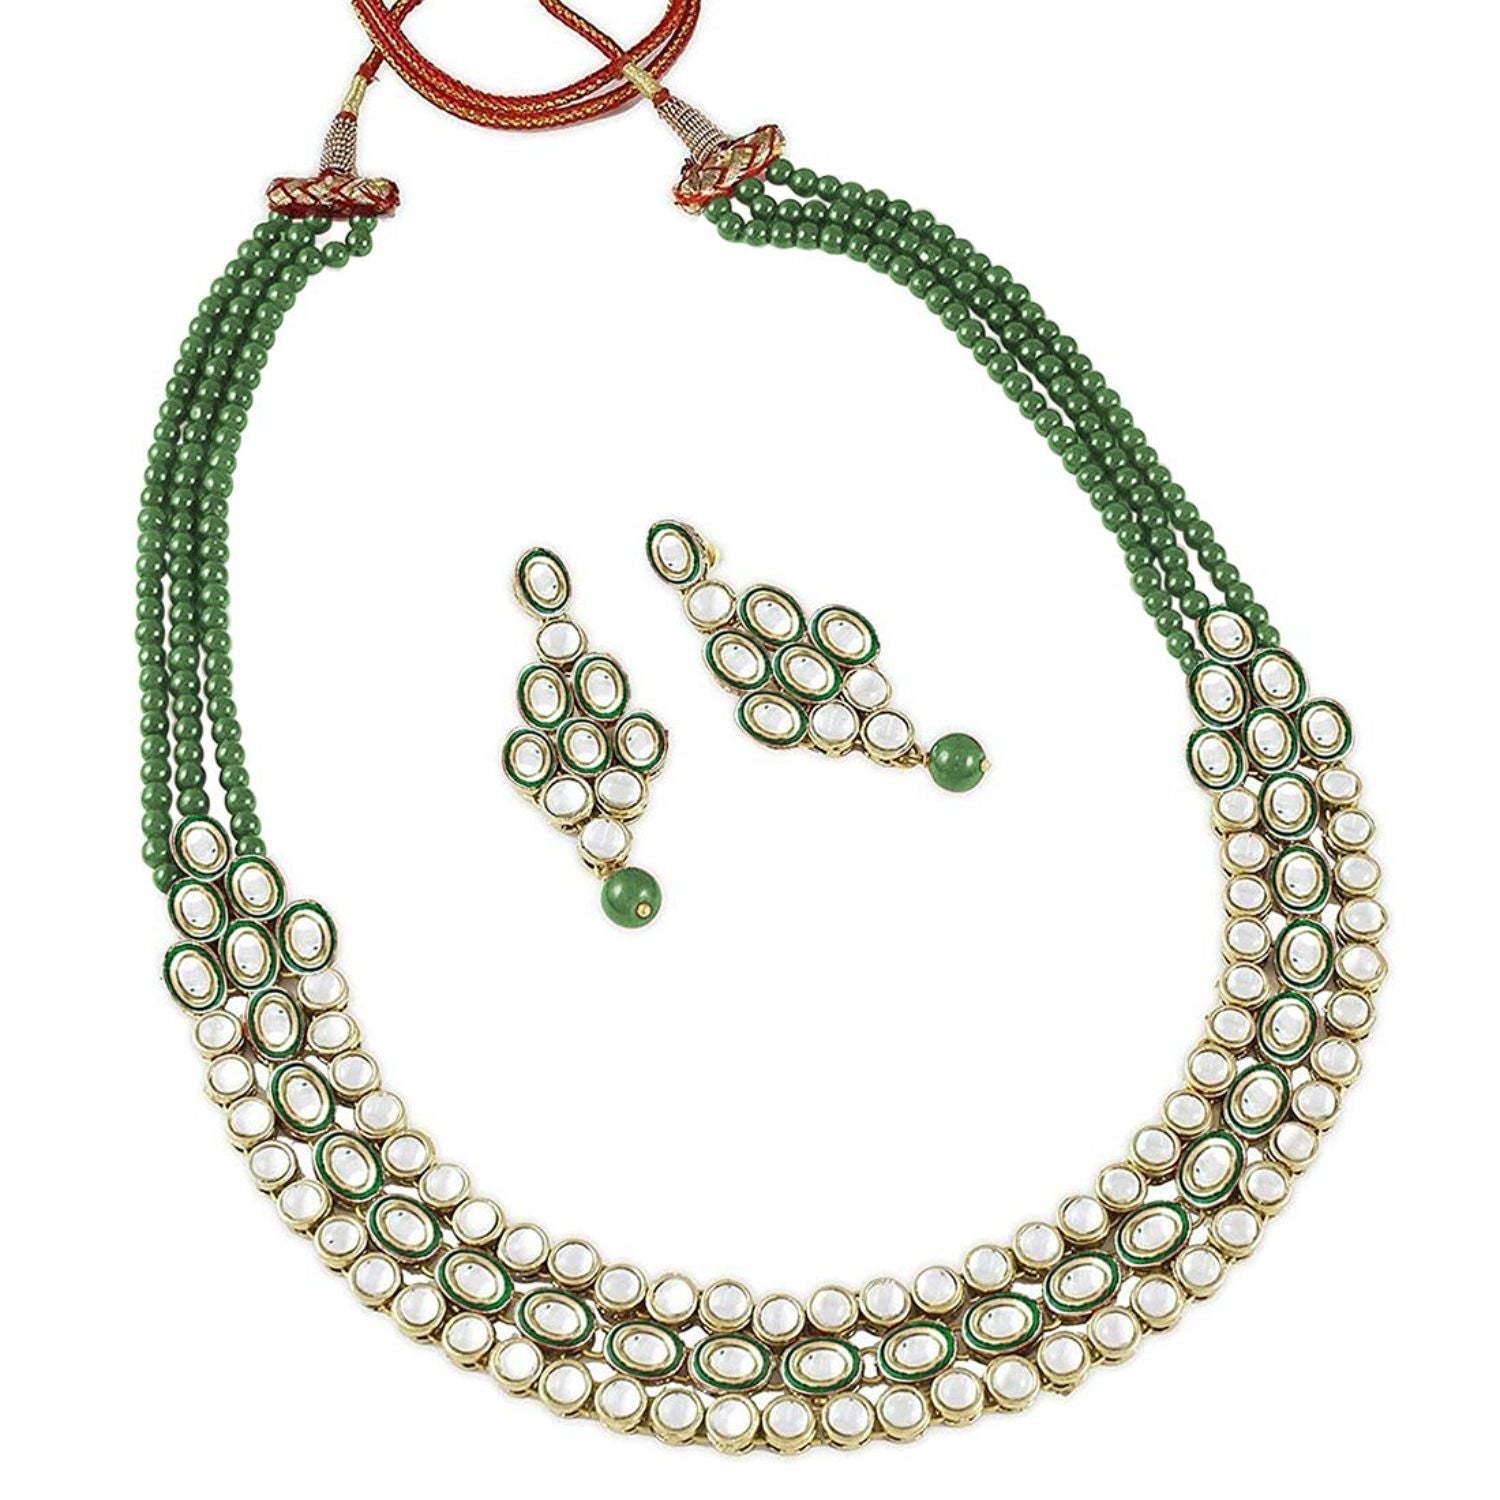 Women's 18K Gold Plated Traditional Stunning Green Meenakari Kundan Studded Pearl Necklace Jewellery Set with Earrings  - I Jewels